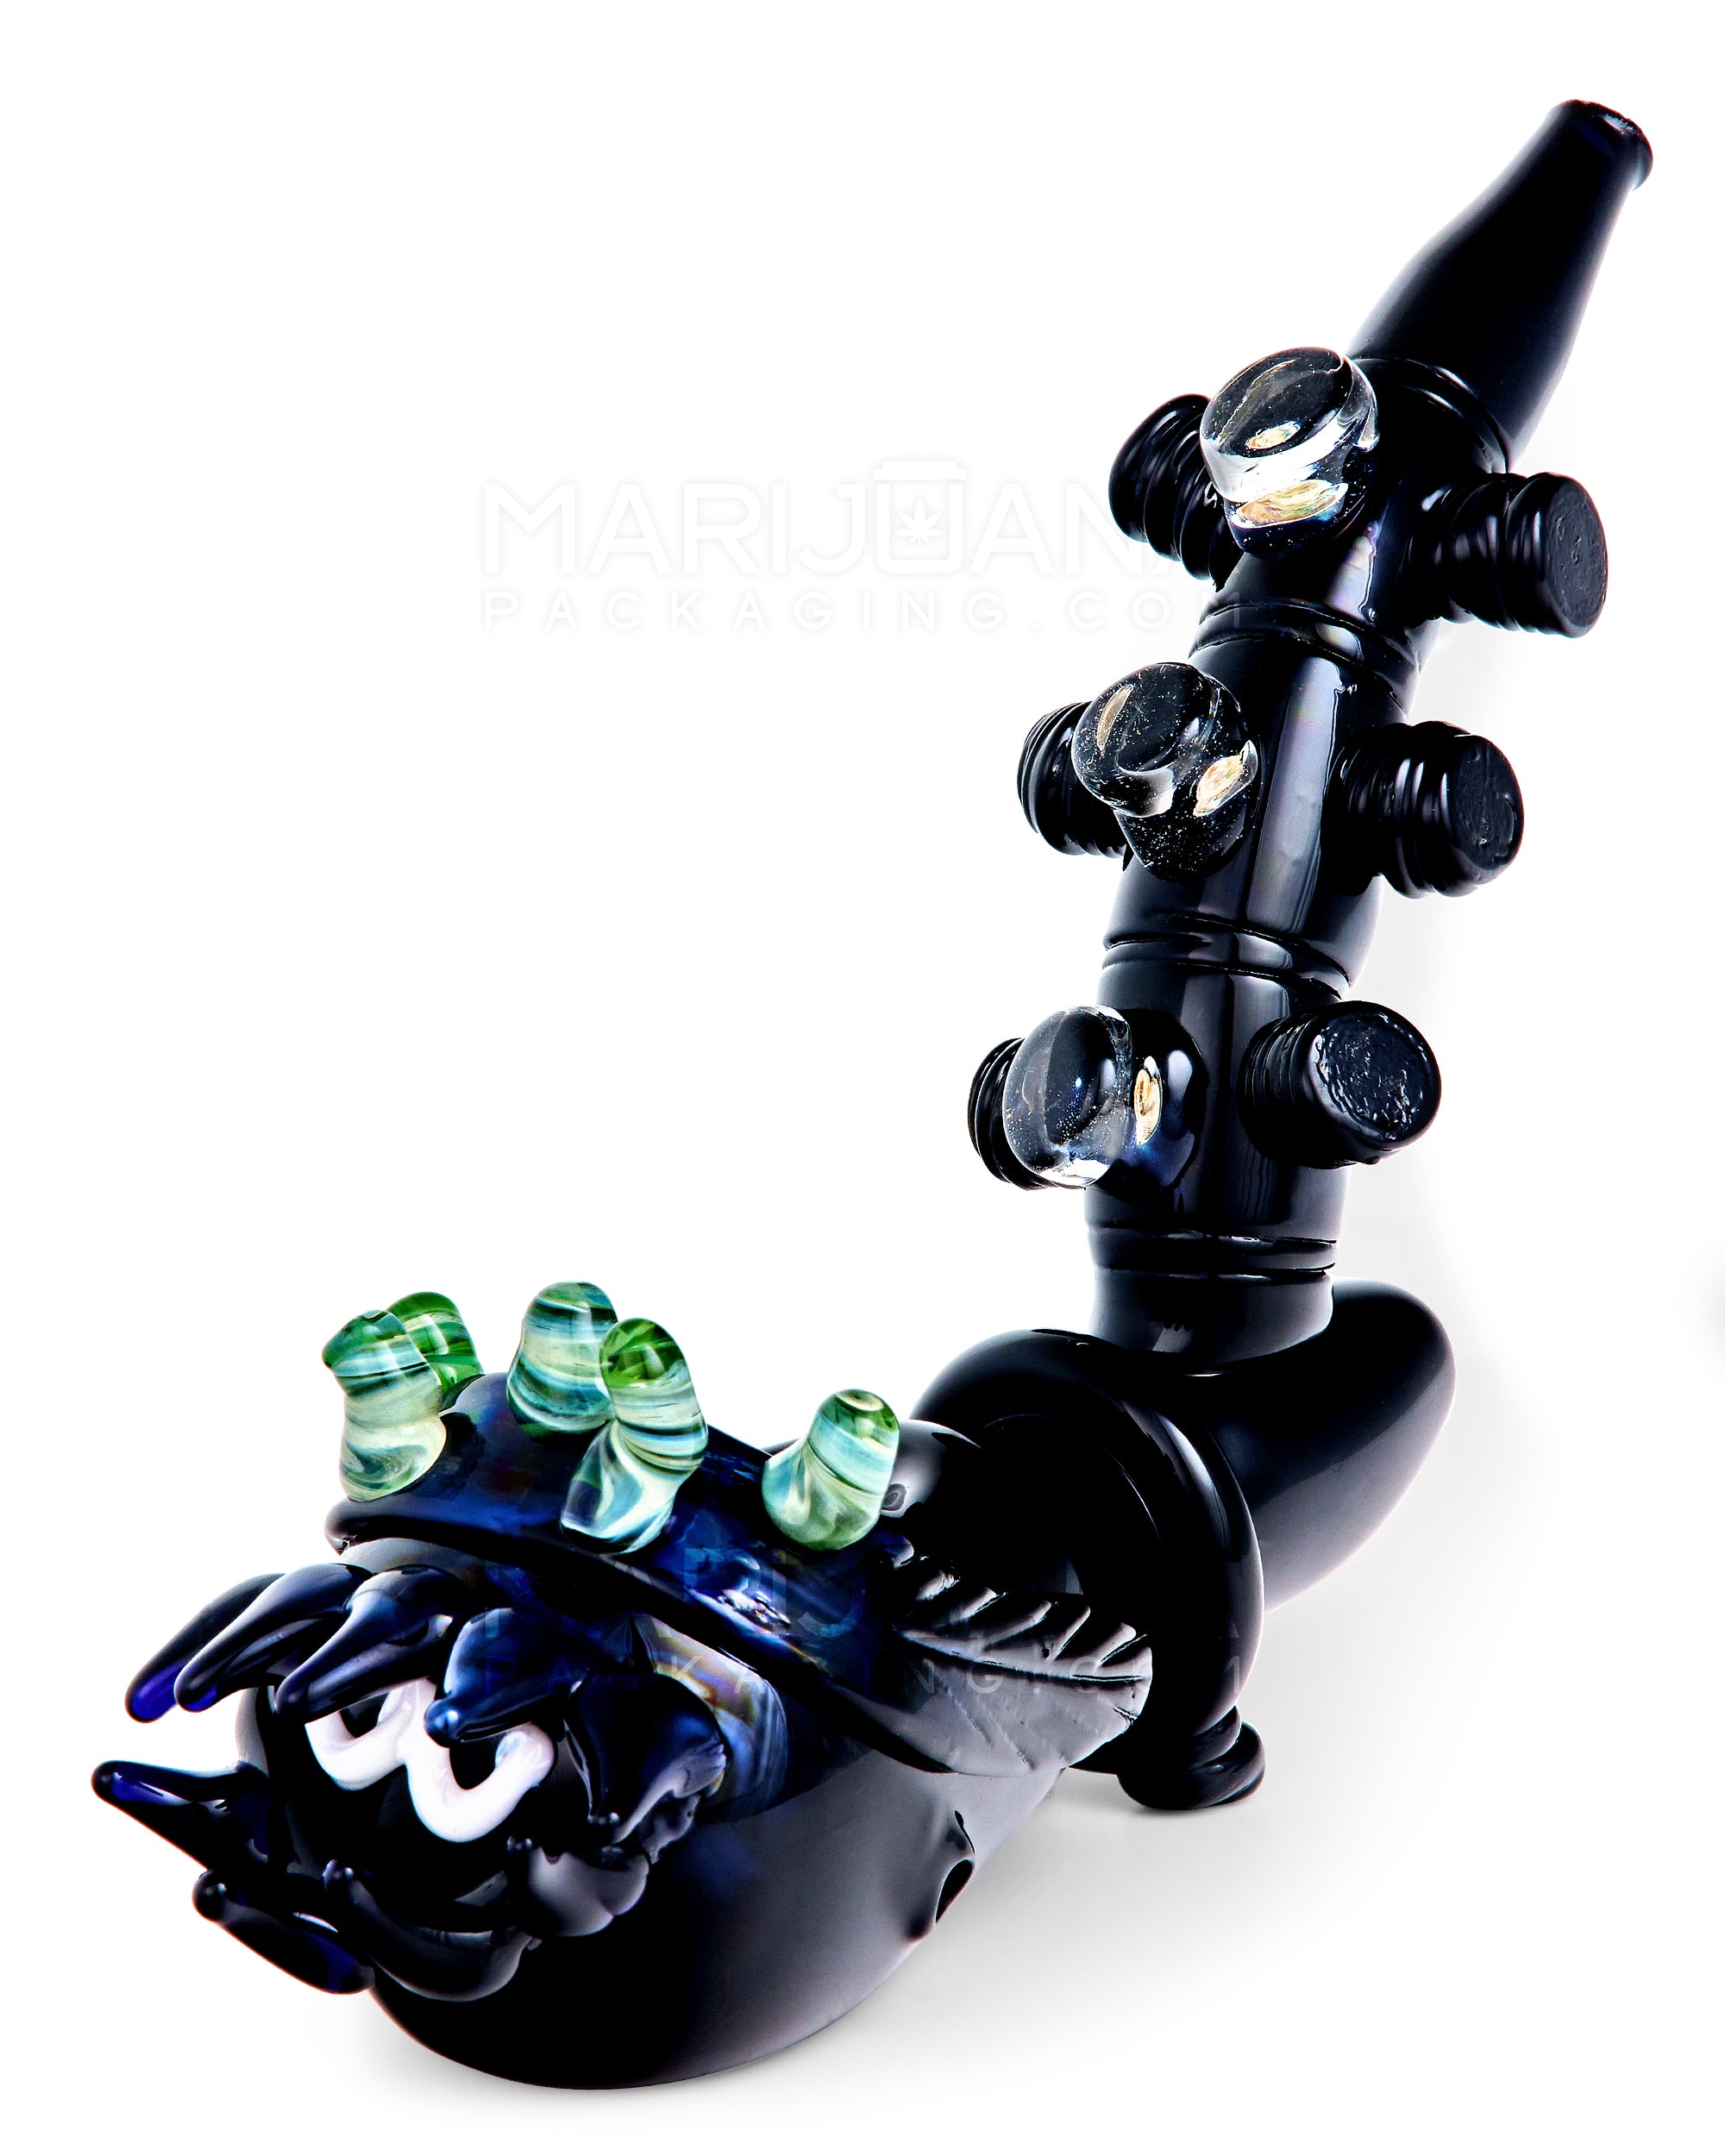 Heady | Black Lagoon Spiked Hand Pipe w/ Marble Knob Knockers | 9in Long - Glass - Black - 6